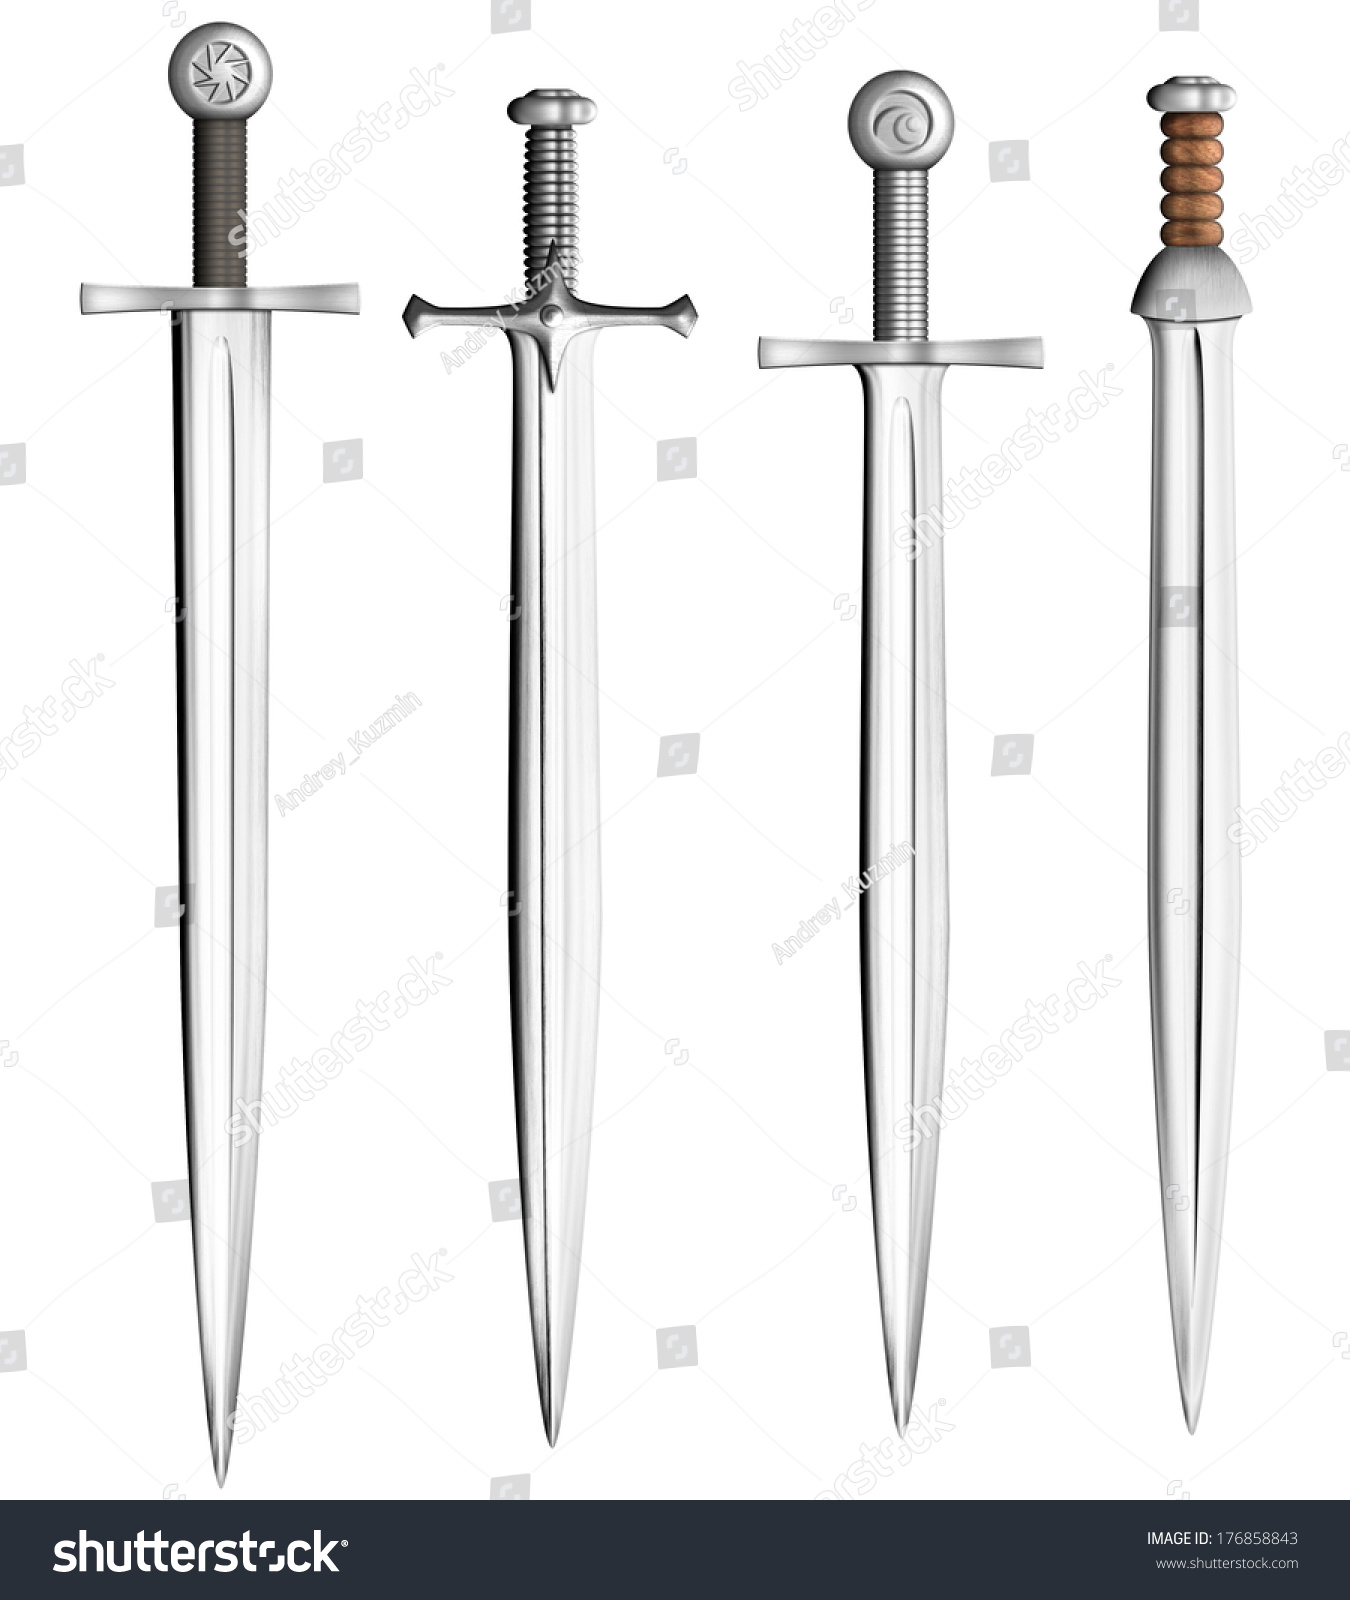 Metal Swords Collection Isolated On White Stock Photo 176858843 ...